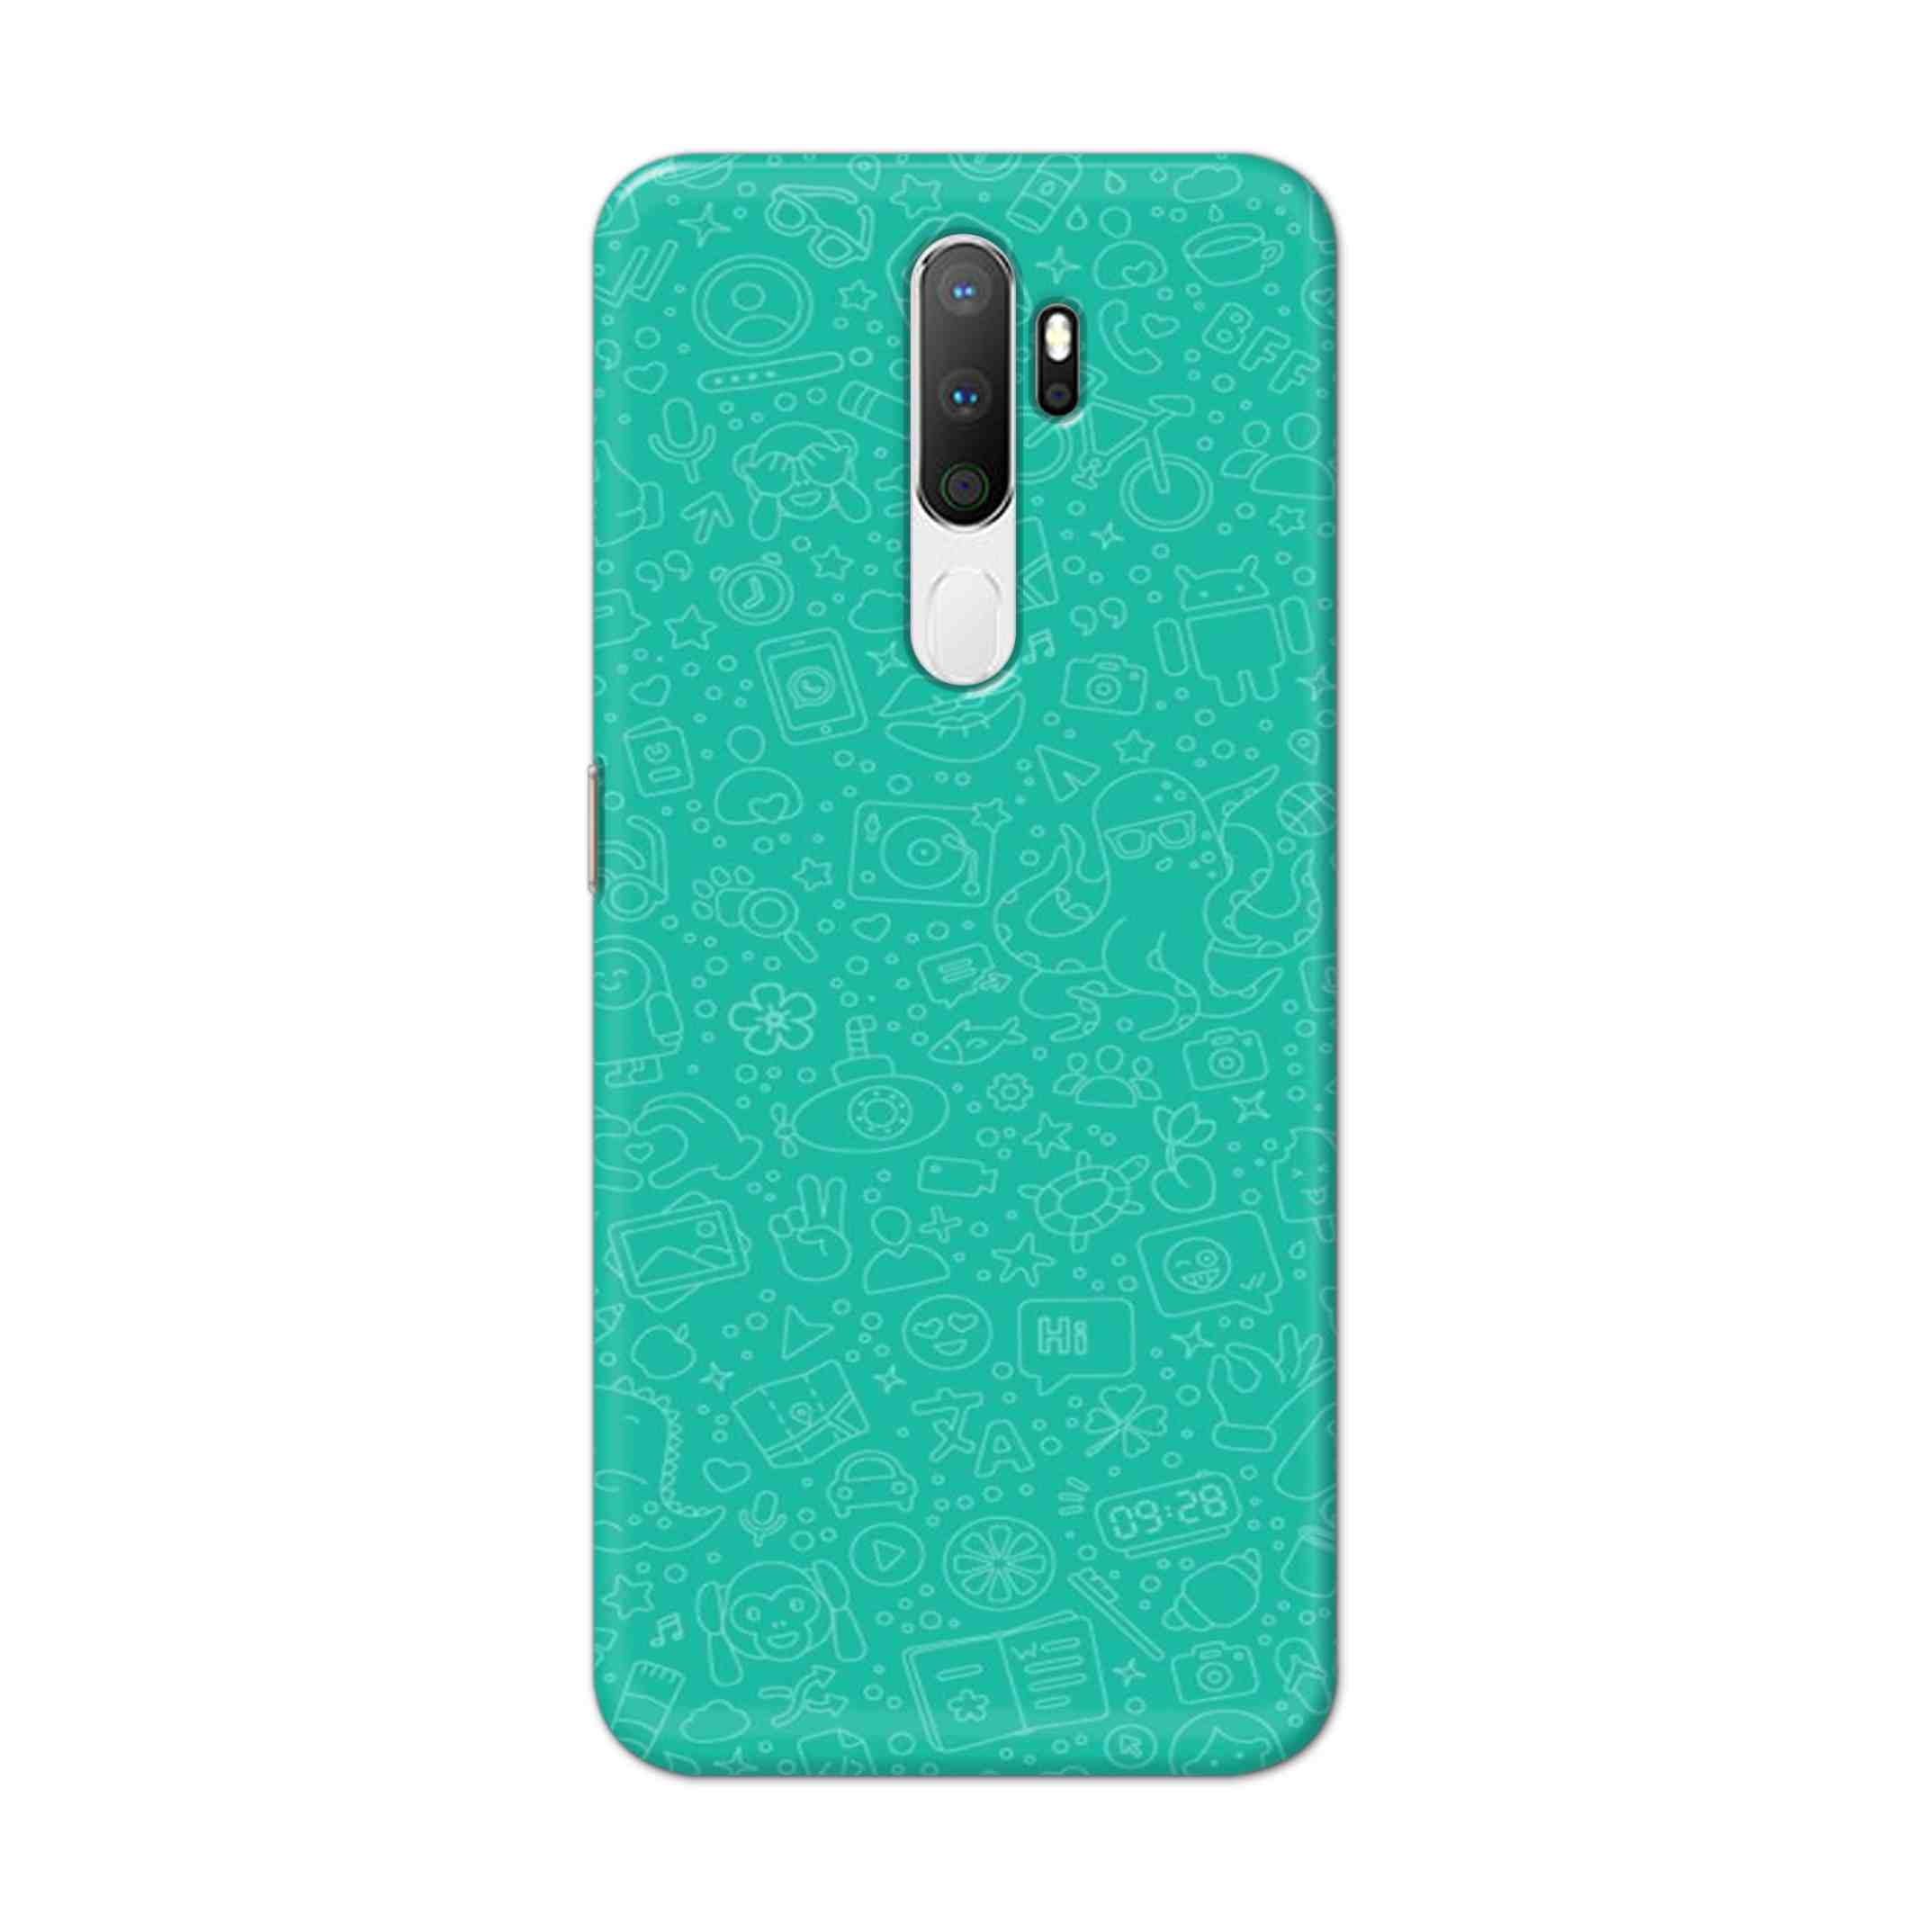 Buy Whatsapp Hard Back Mobile Phone Case Cover For Oppo A5 (2020) Online